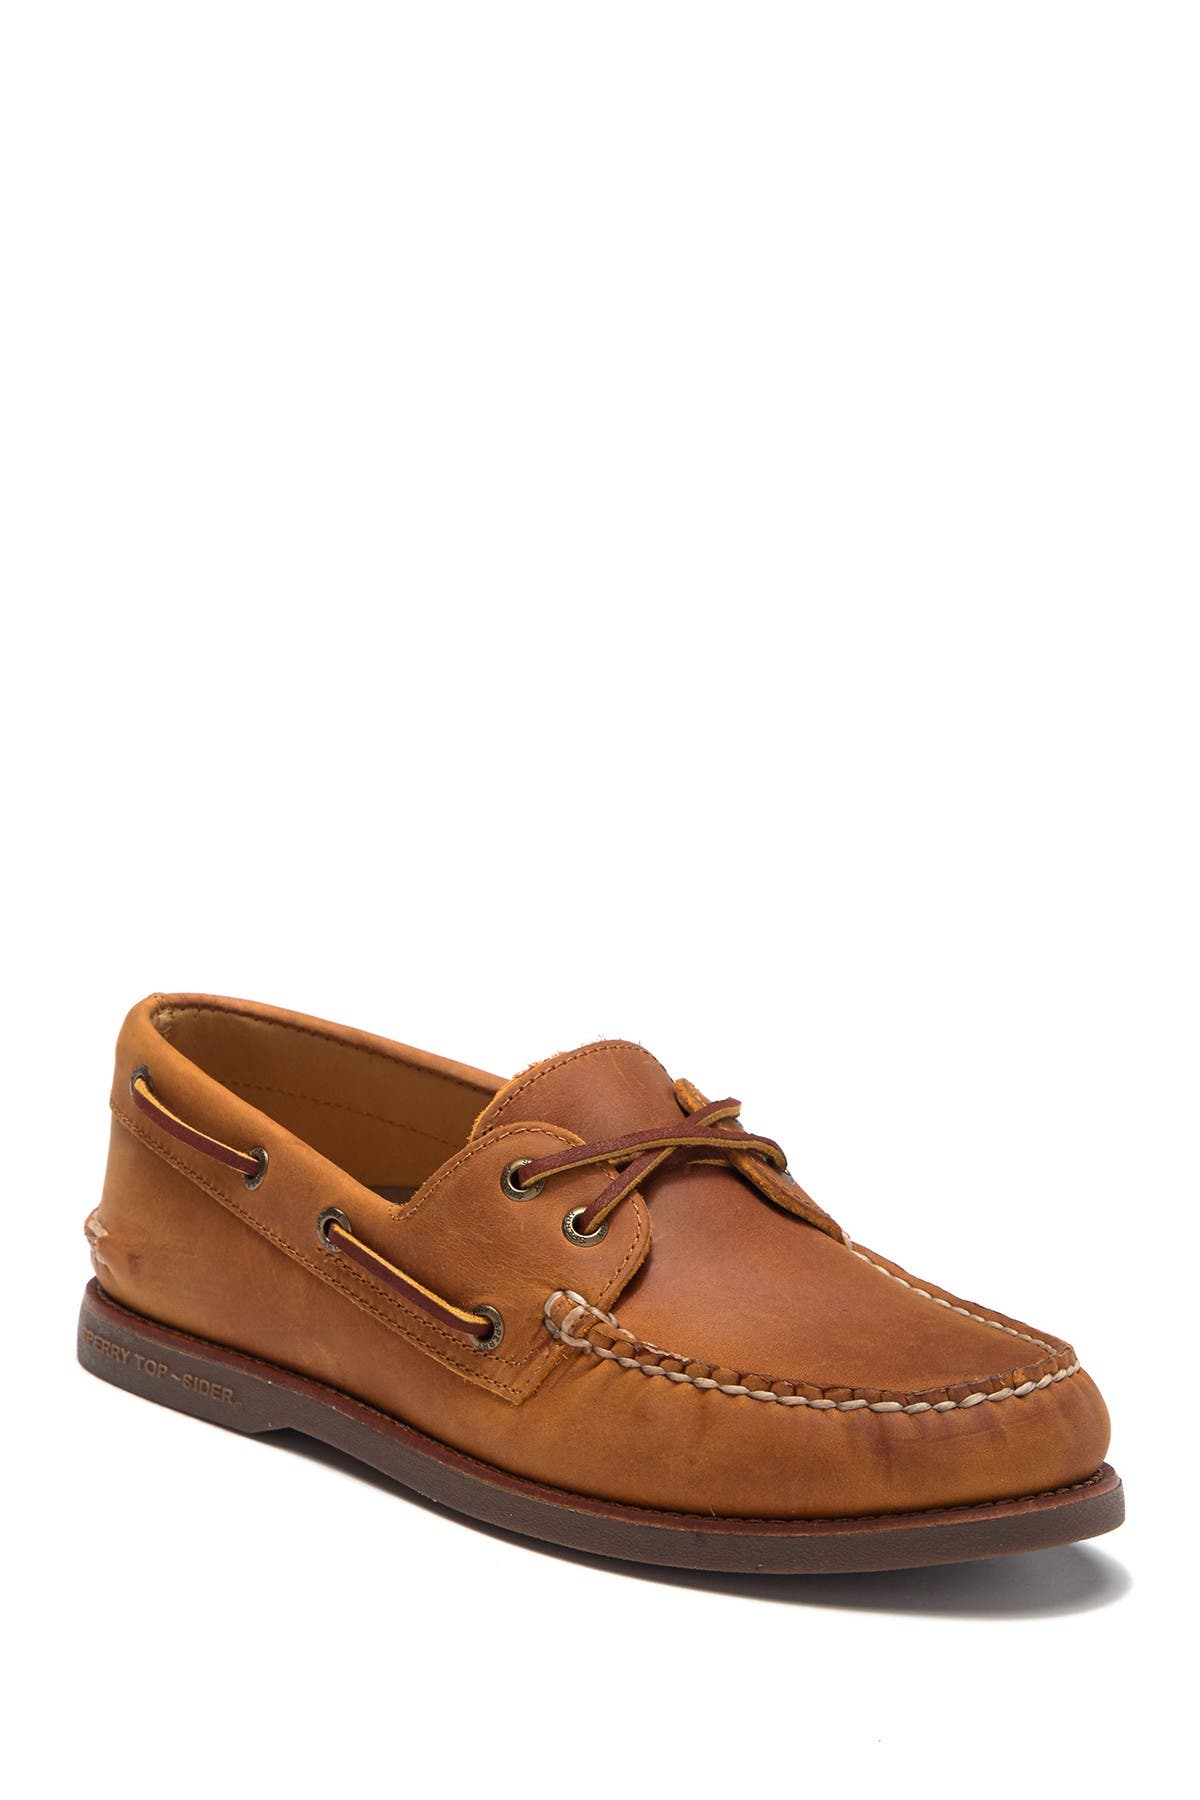 Sperry | Gold Cup Authentic Original 2 